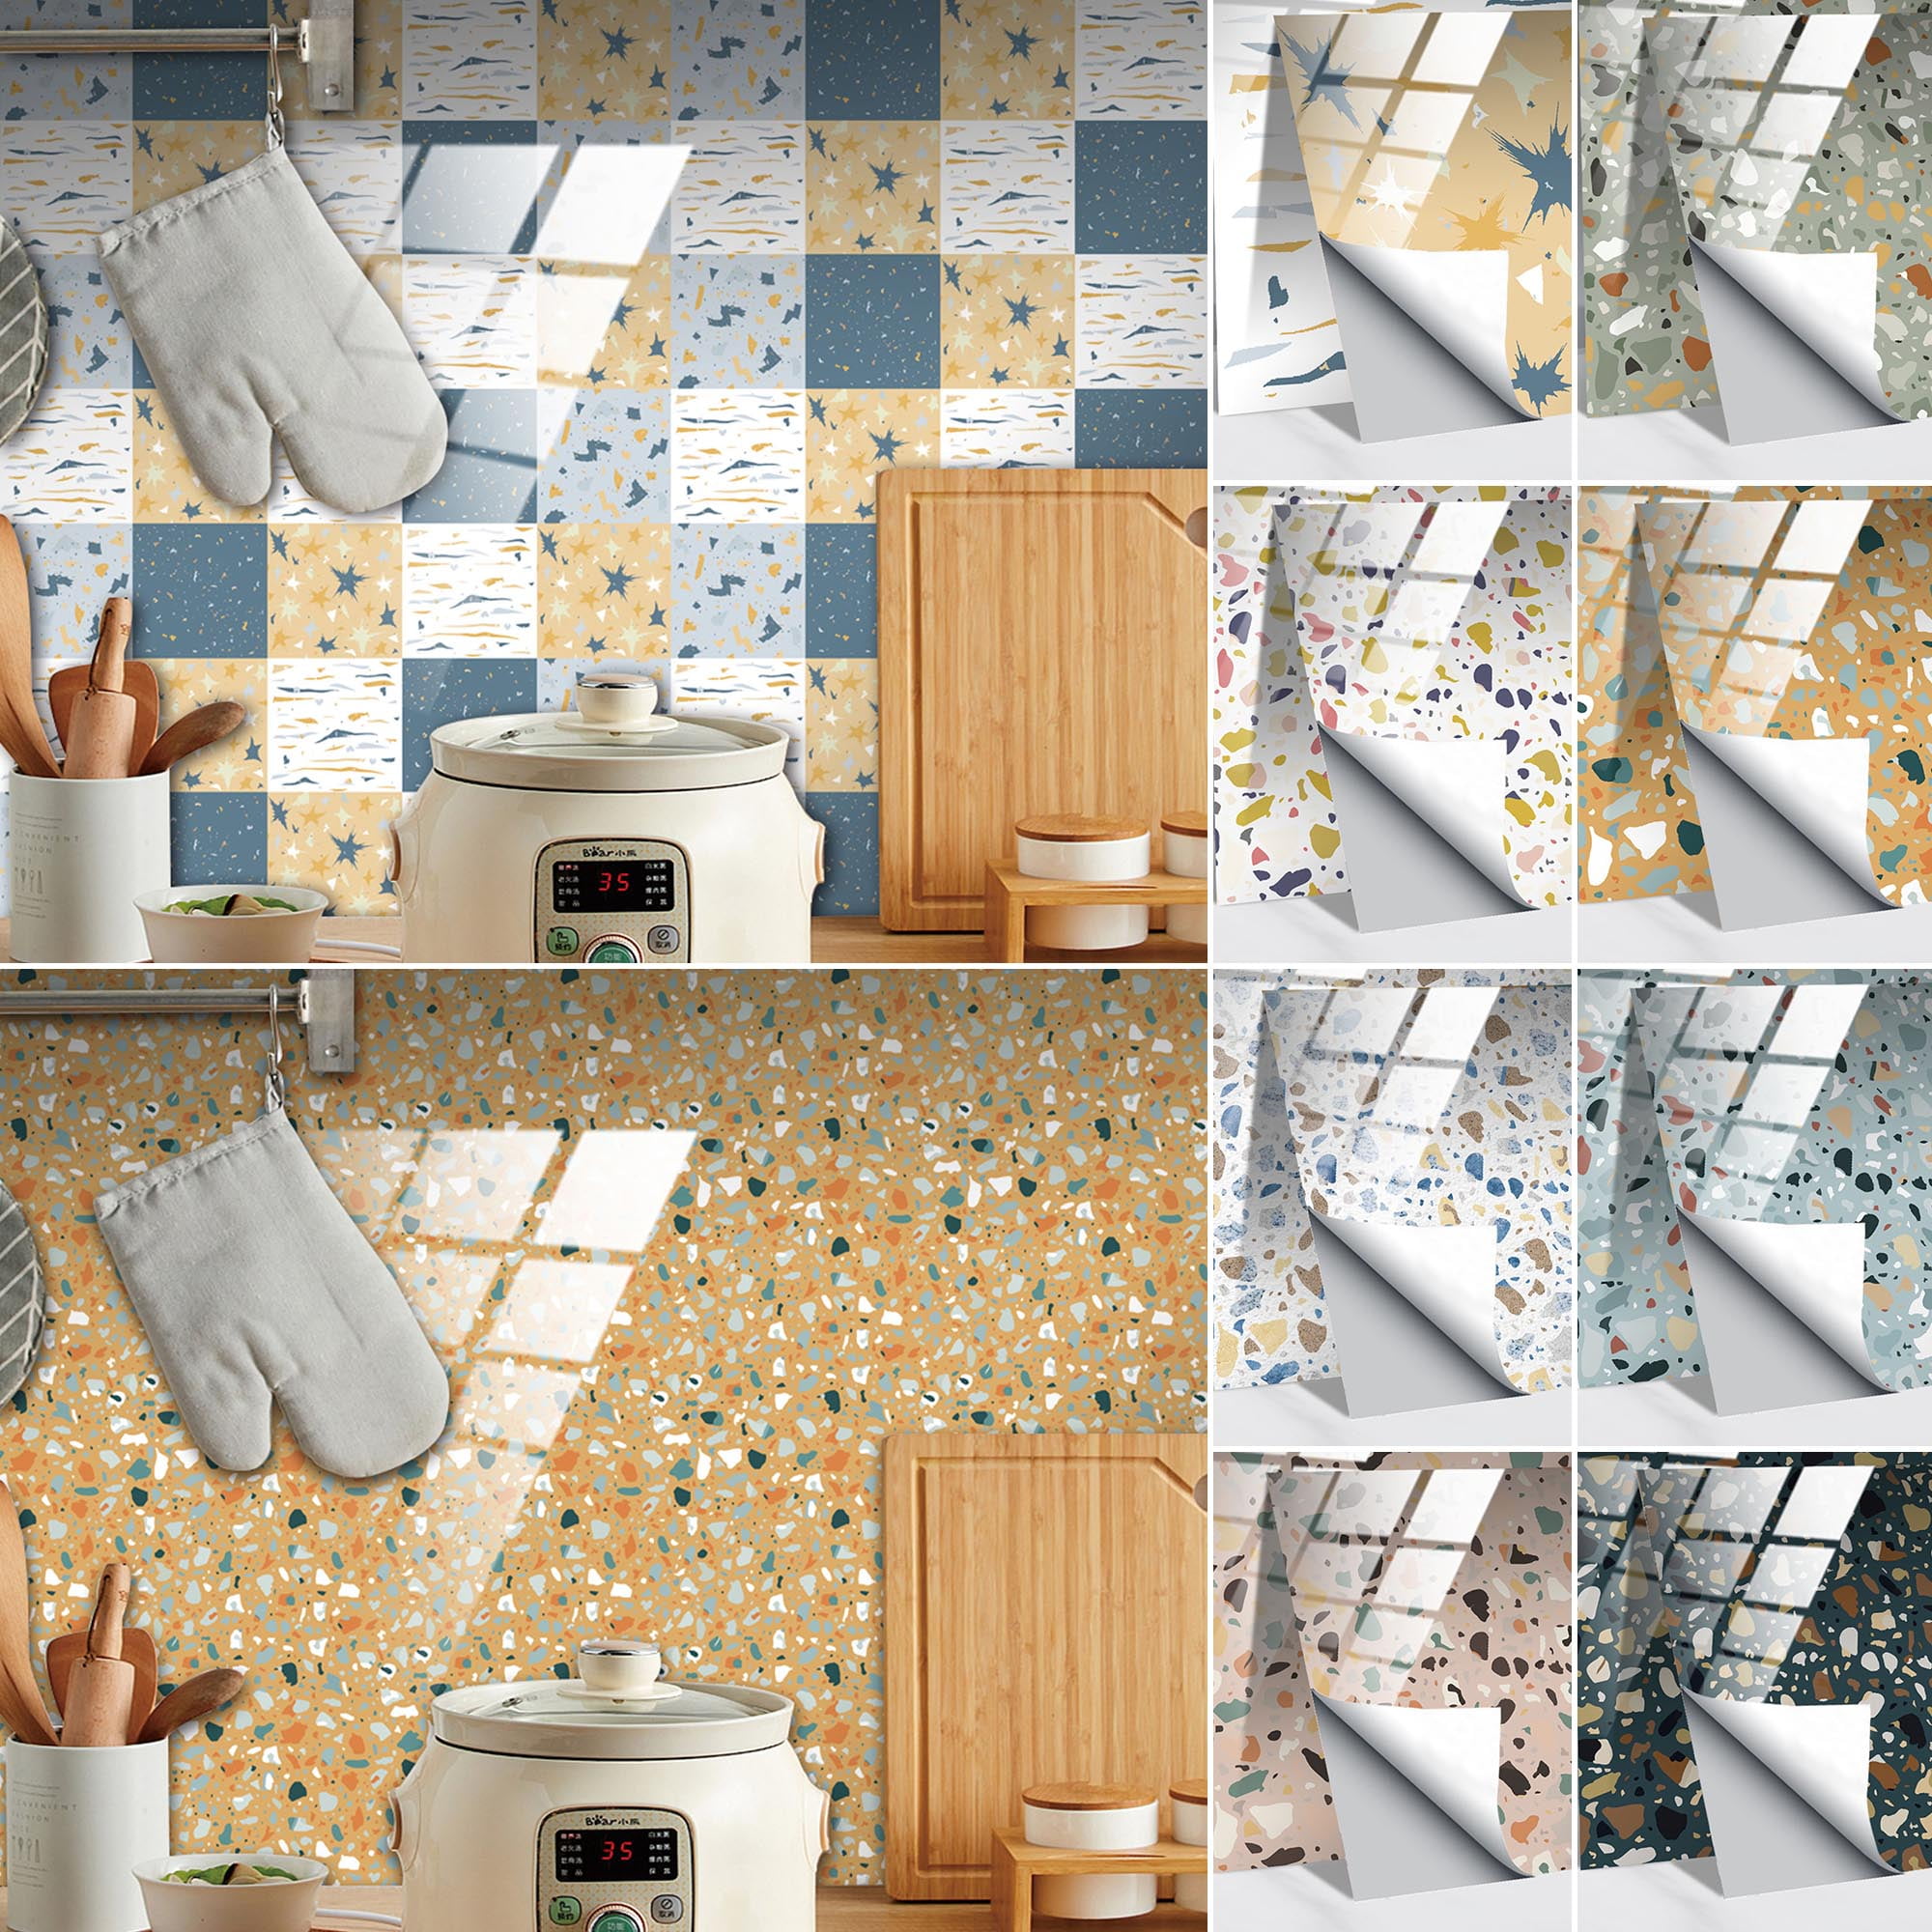 3D Mosaic Sticker Kitchen Tile Stickers Bathroom Self-adhesive Wall Decor Home